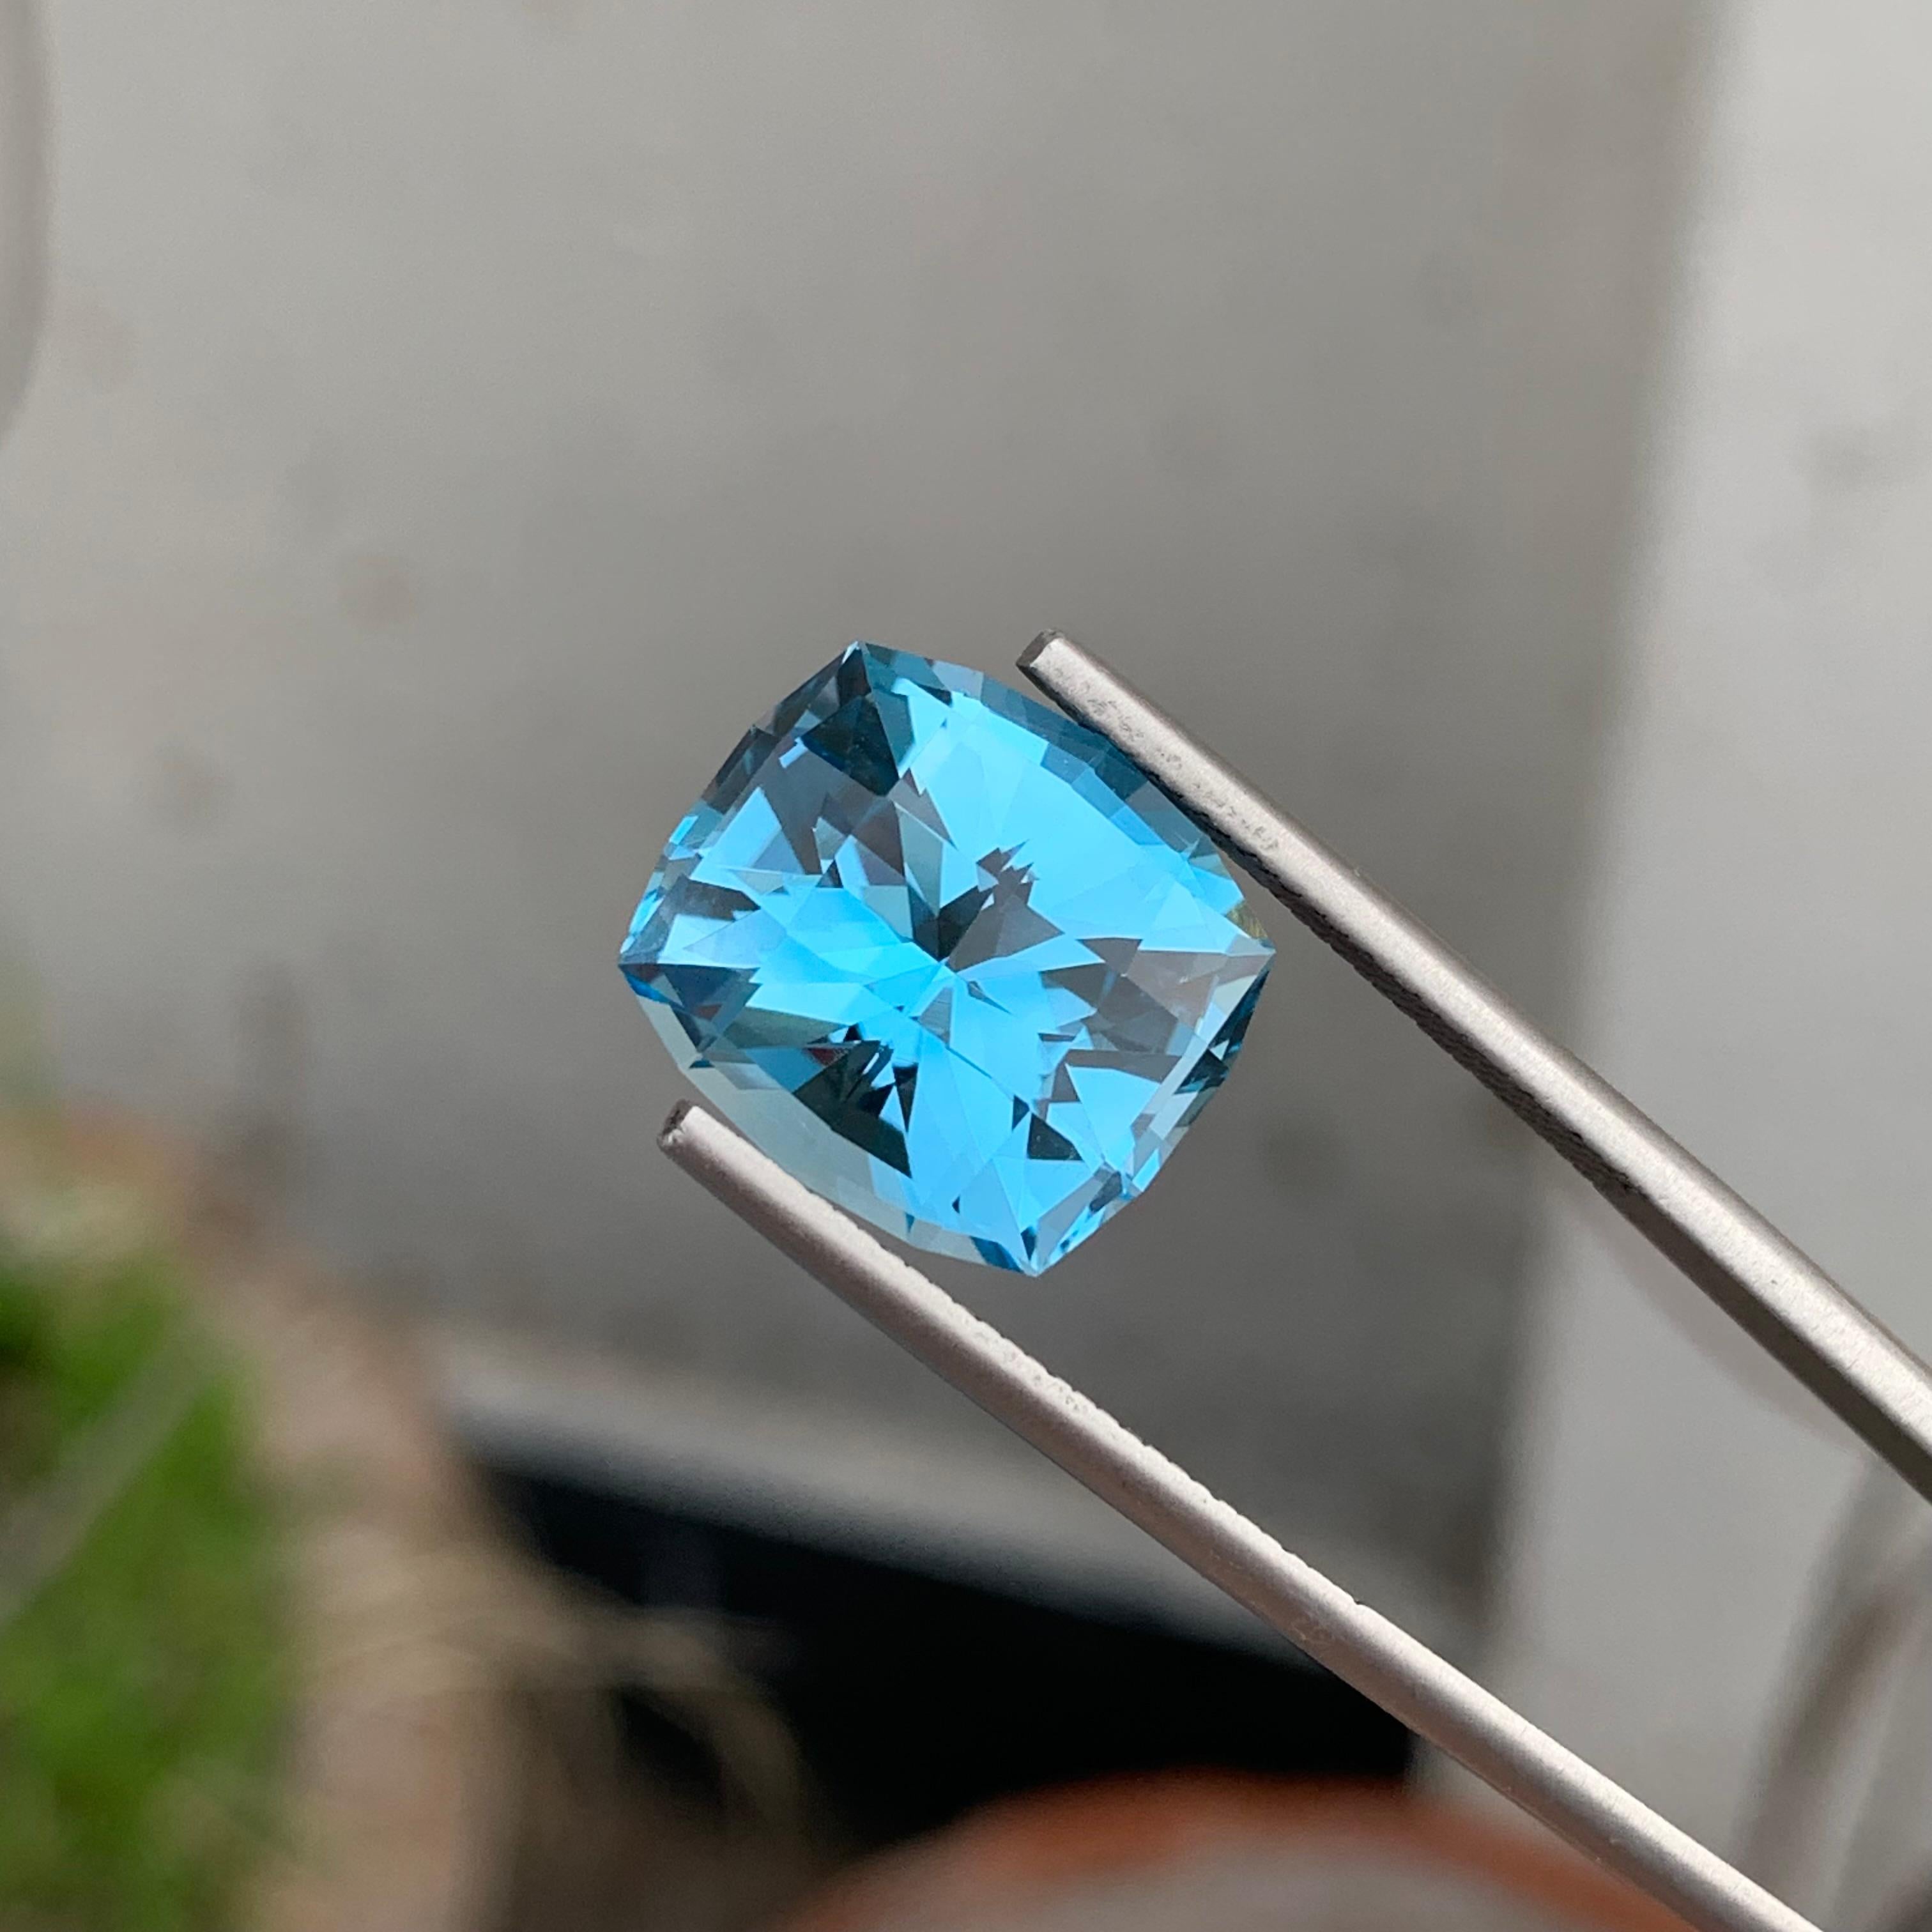 12.15 Carat Fancy Cut Faceted Sky Blue Topaz Gemstone For Jewellery Making  For Sale 2